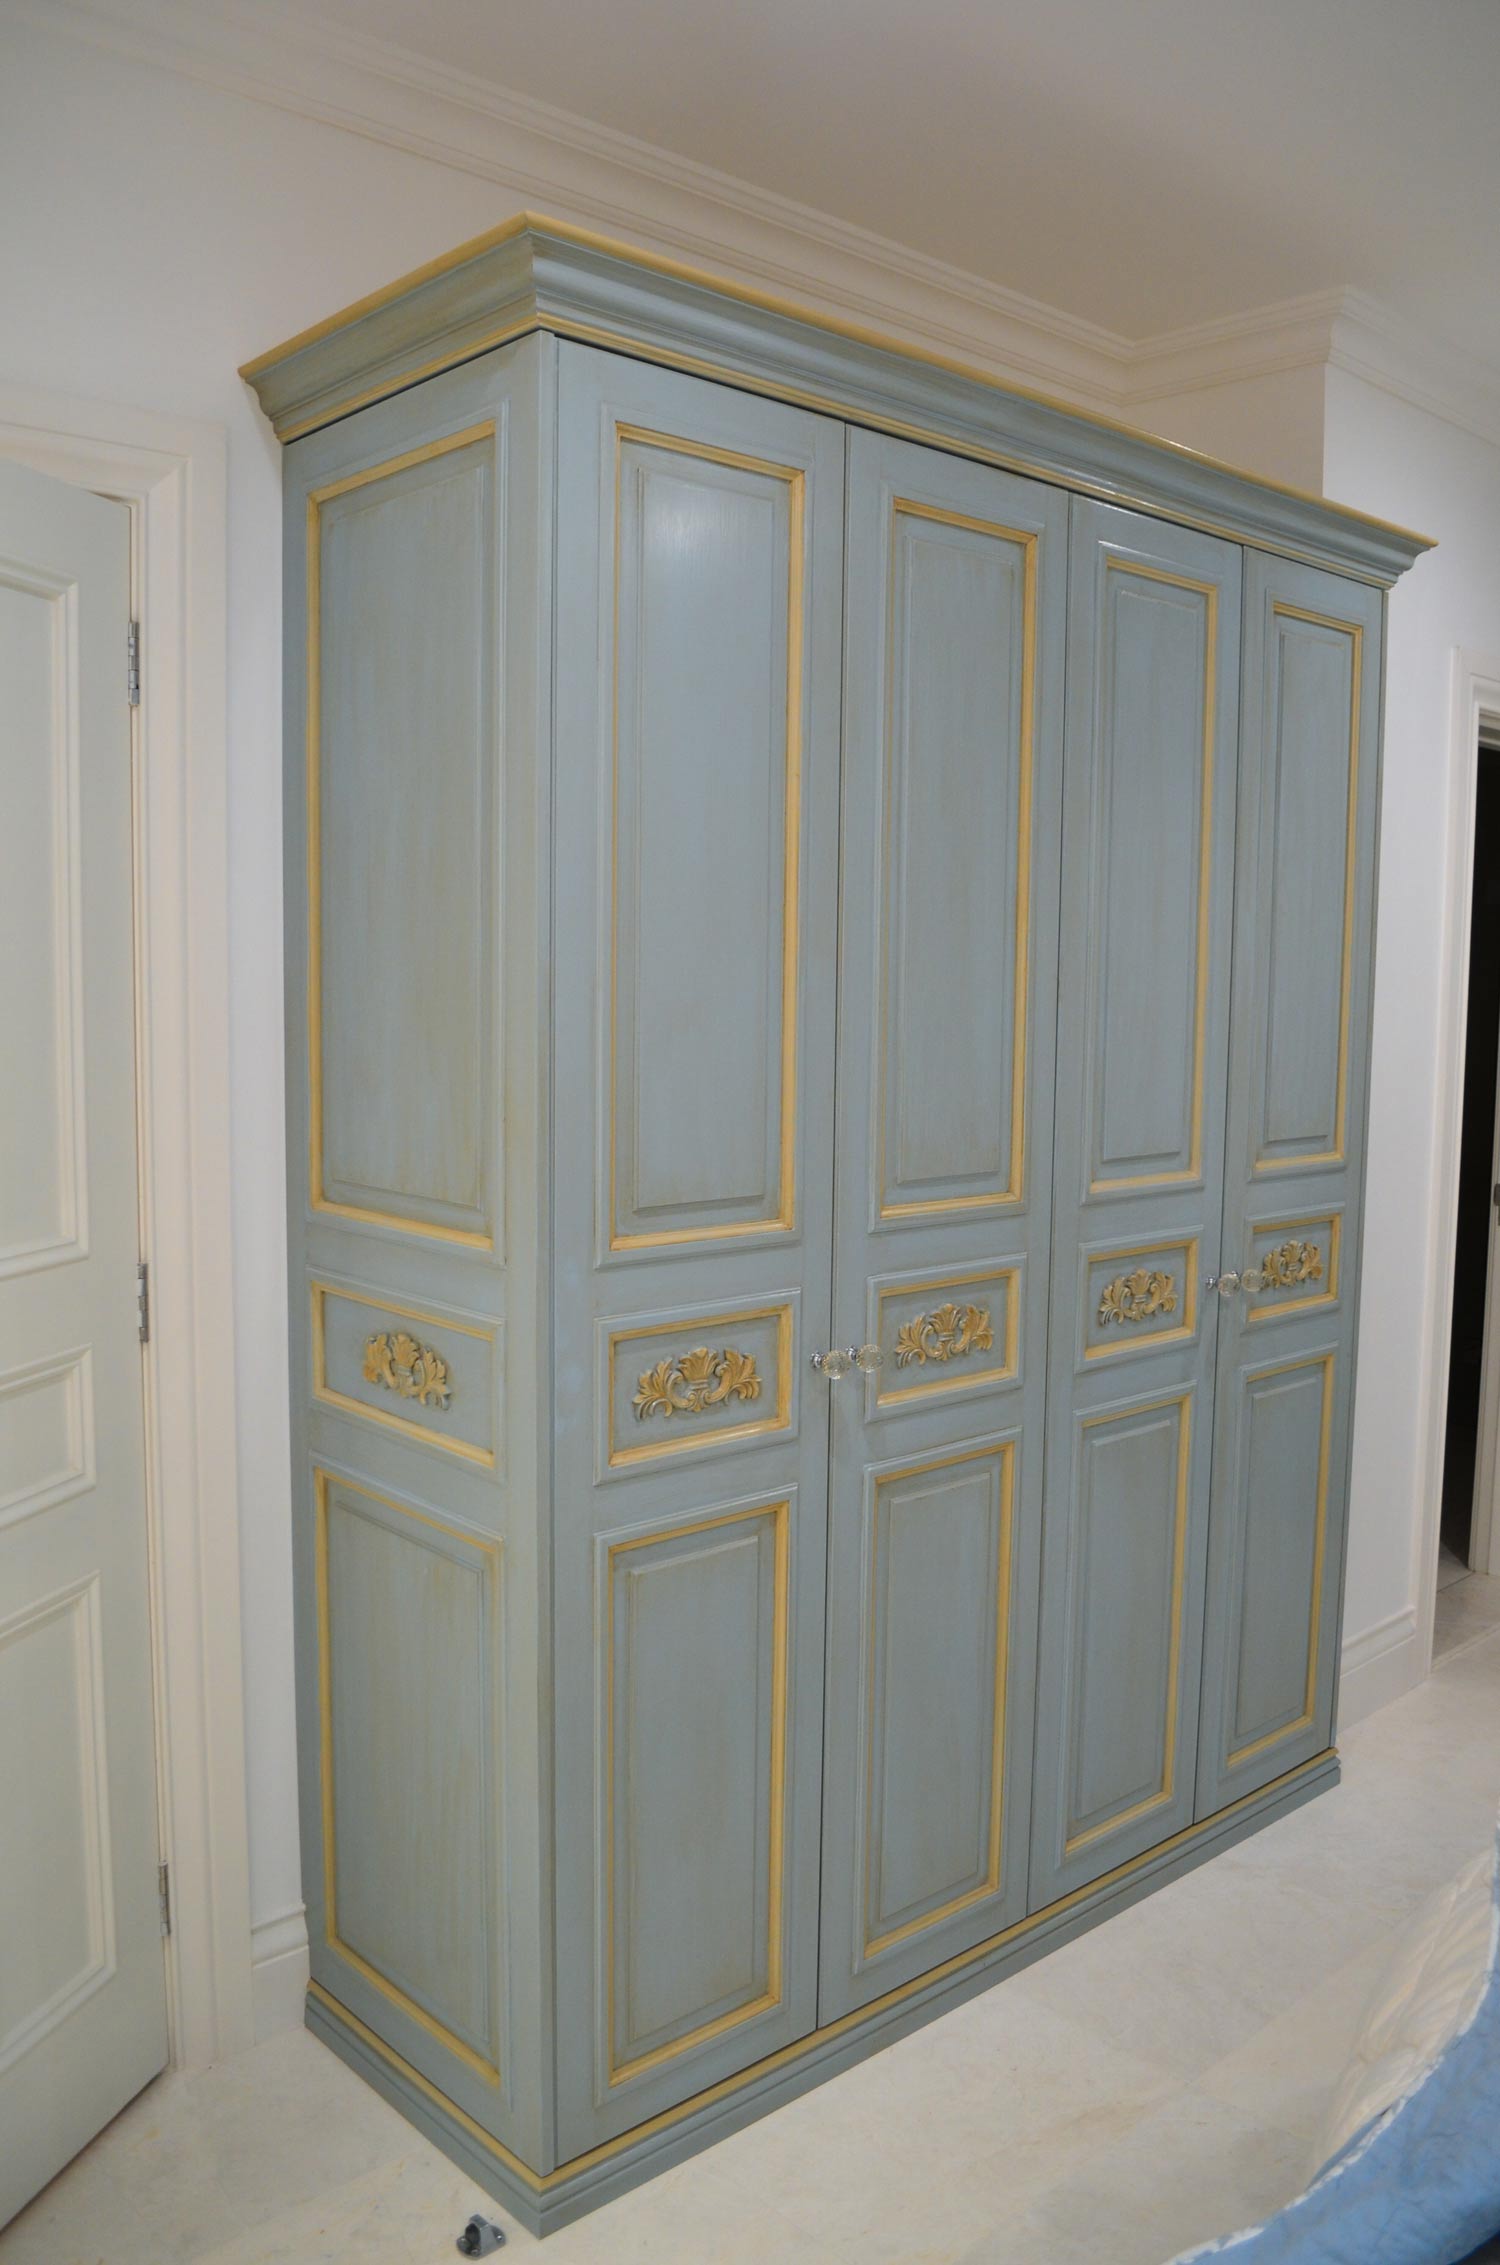 8 Custom finish on wardrobe with four doors, panelling in yellow gold